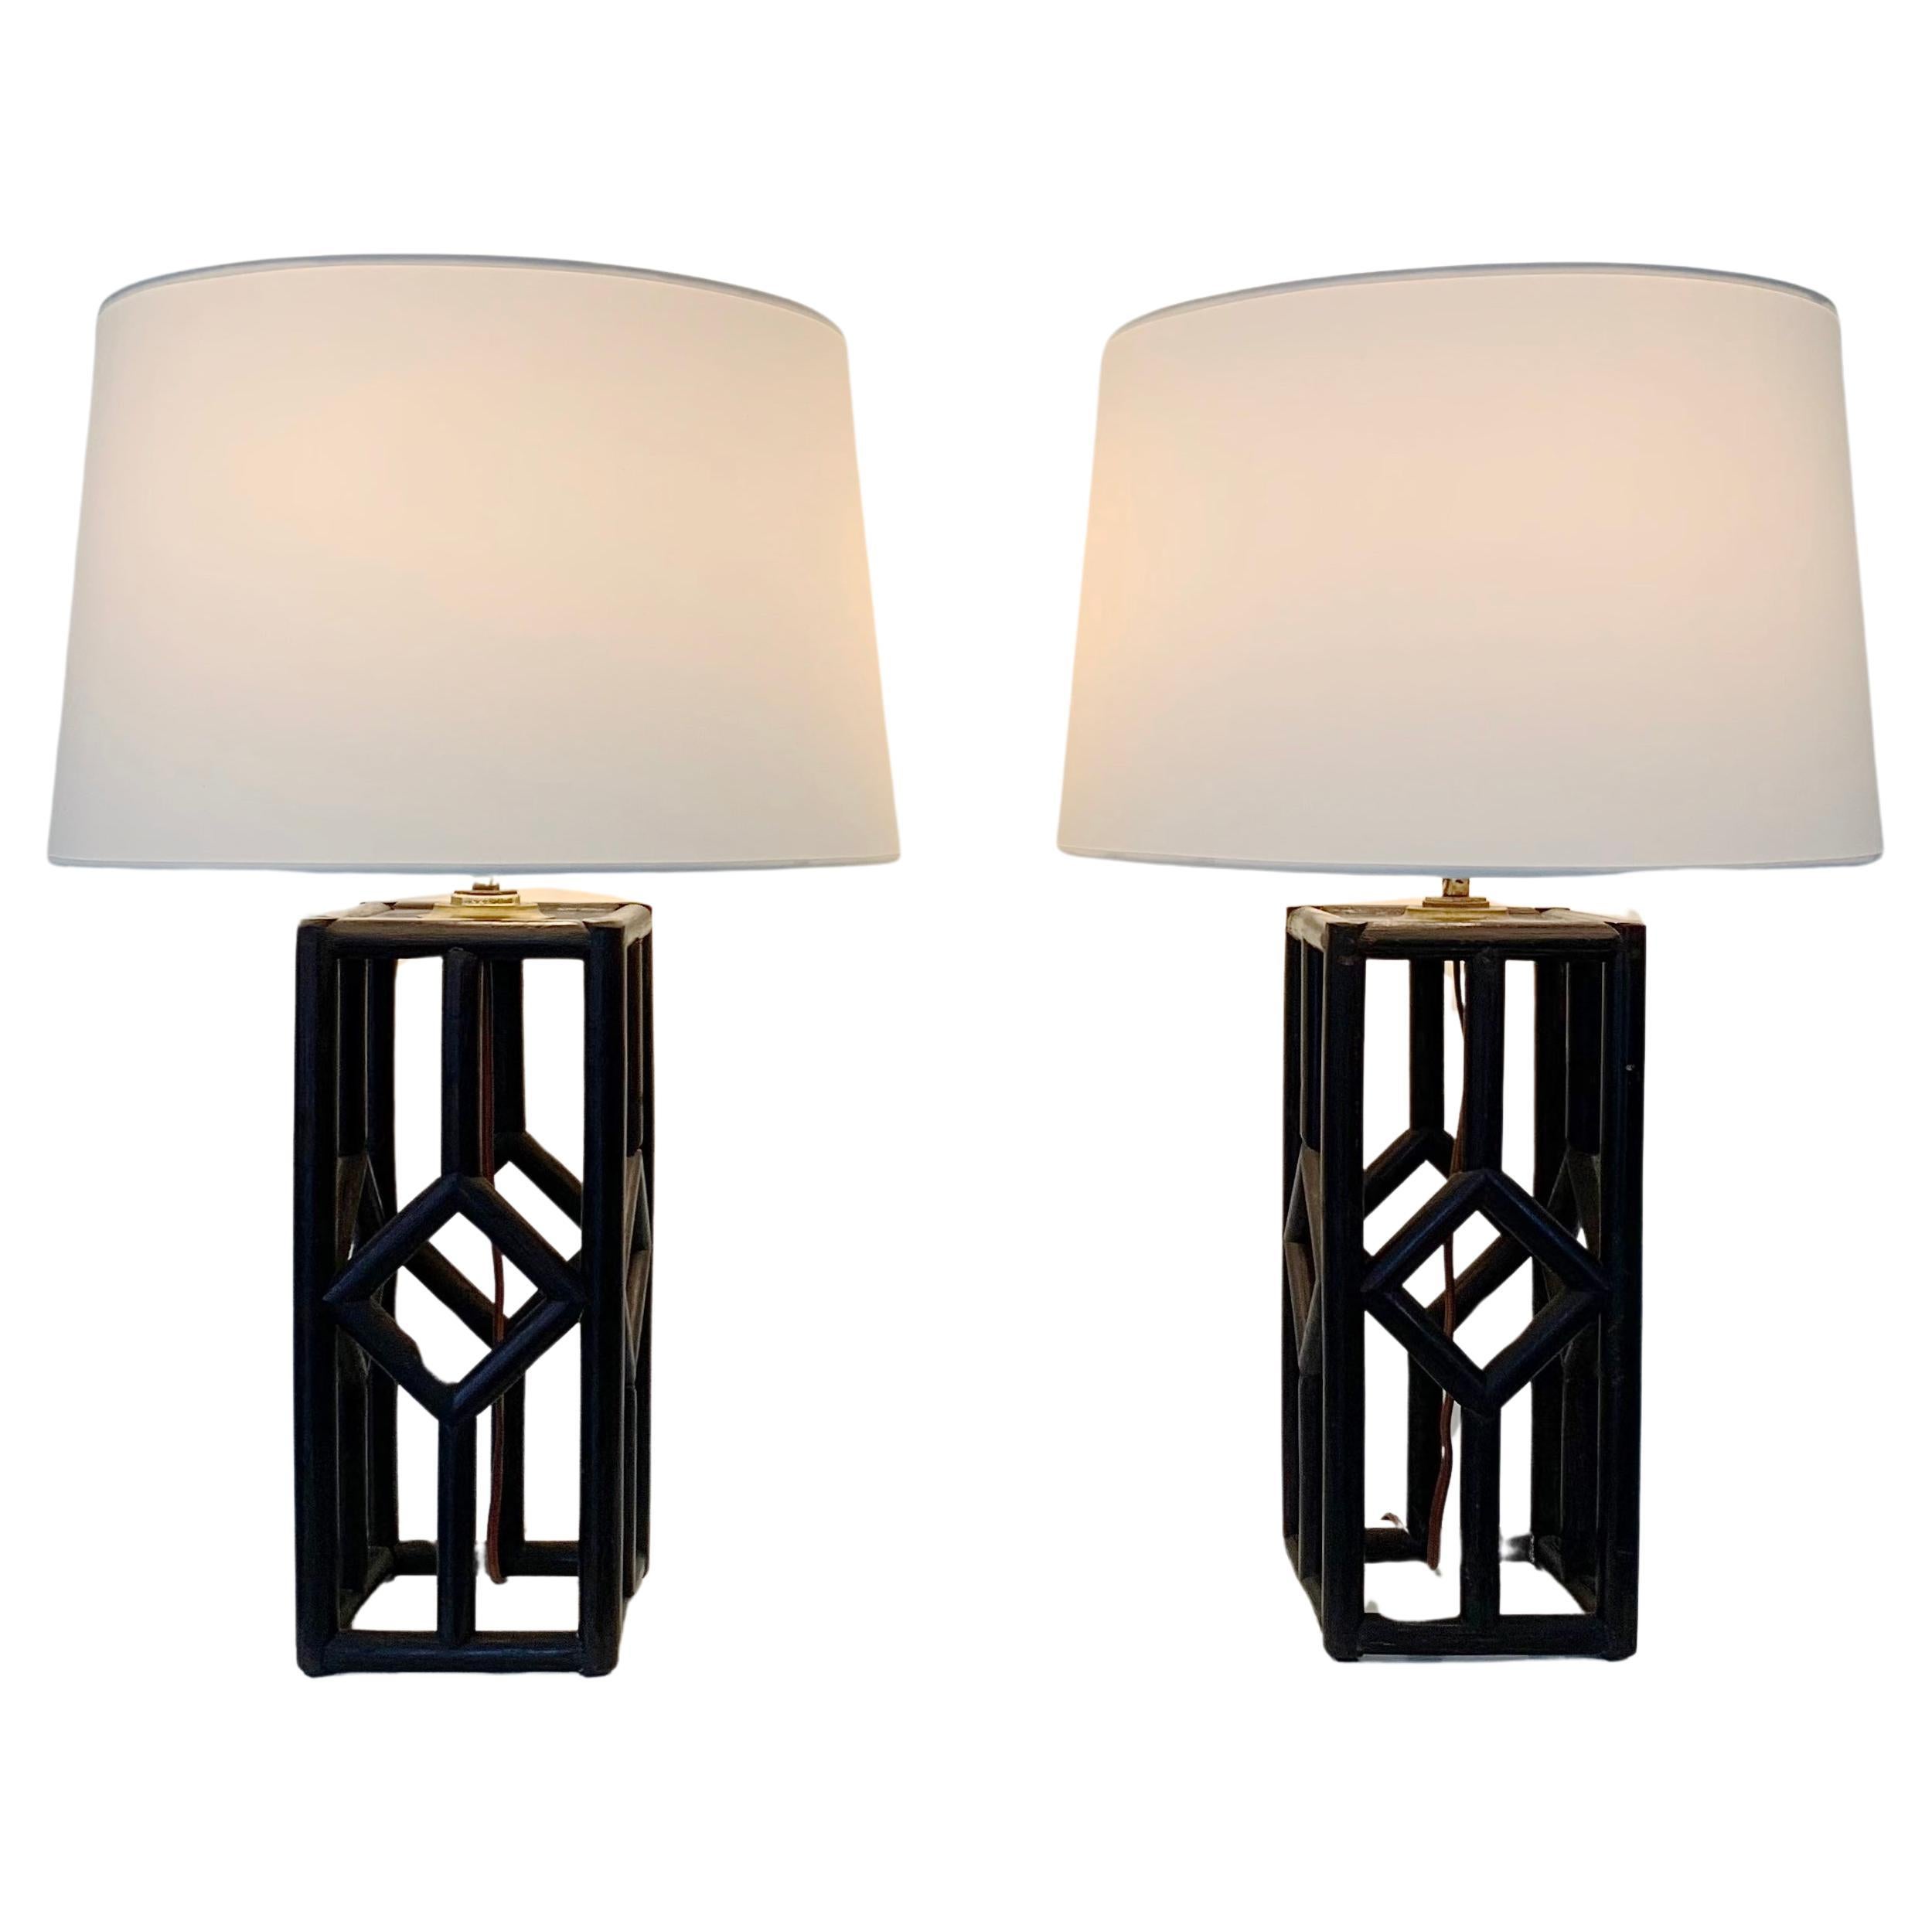 Highly decorative mid-century pair of lamps, circa 1960, Italy.
Bamboo, new white fabric shades.
One E27 or E26 bulb.
Dimensions: 65 cm total height, diameter of the shade: 40 cm.
Good condition.
All purchases are covered by our Buyer Protection